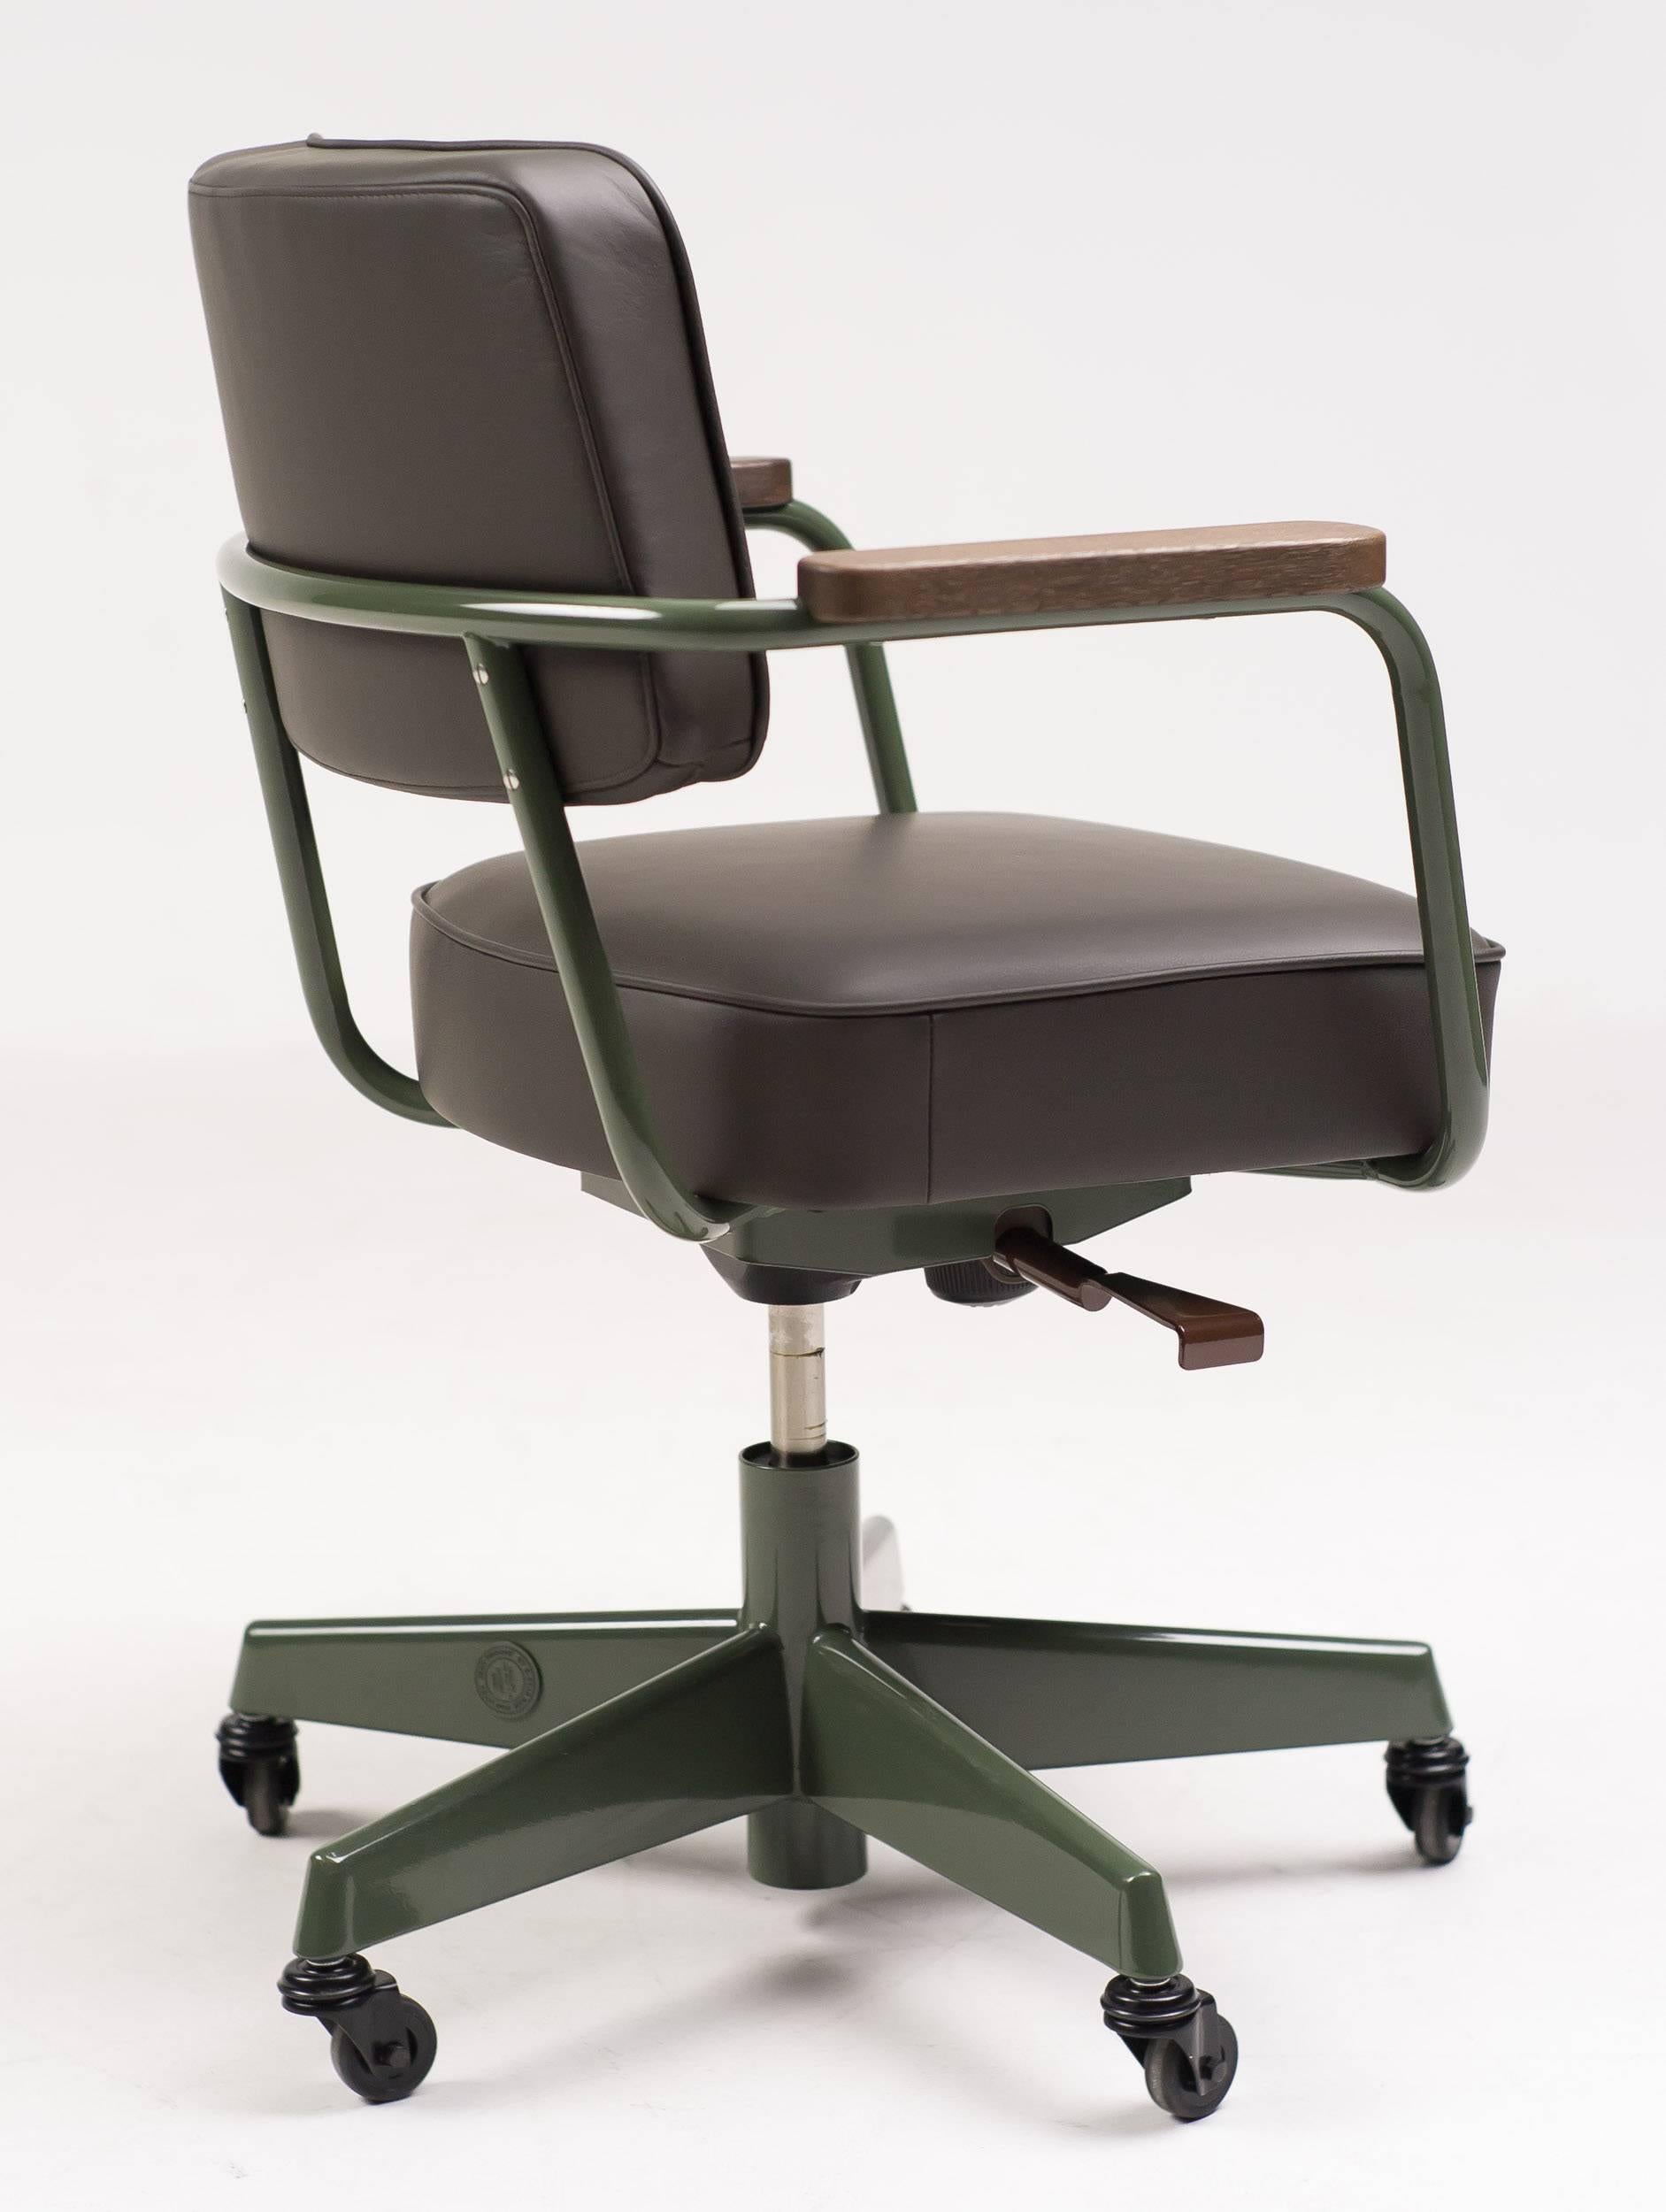 Mid-Century Modern Jean Prouvé Fauteuil Direction Pivotant, G-Star Raw Edition by Vitra